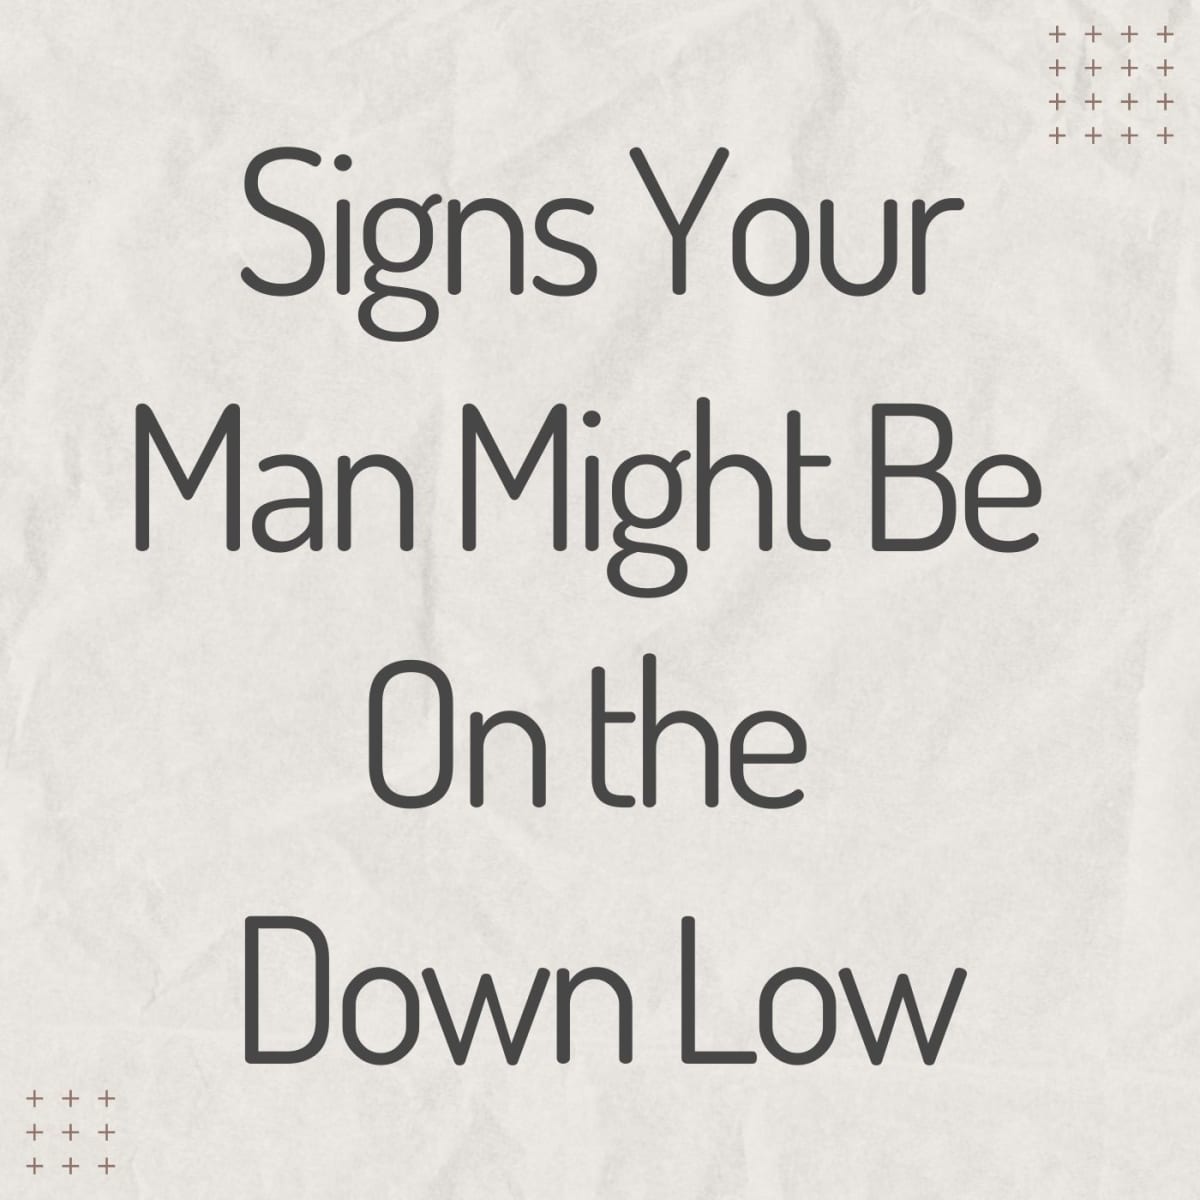 Hot Bf Hd Down Low D - Signs Your Man Might Be On the Down Low - PairedLife